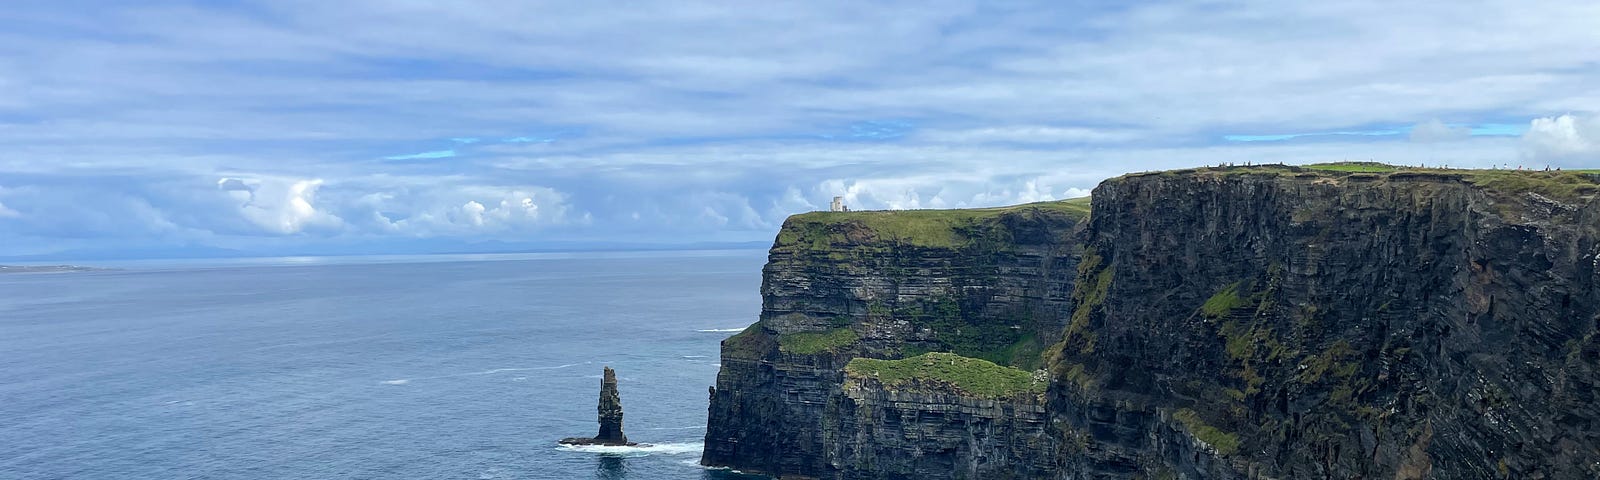 Cliffs of Moher. A rocky cliff with grass. Blue water at the bottom and blue skies overhead.